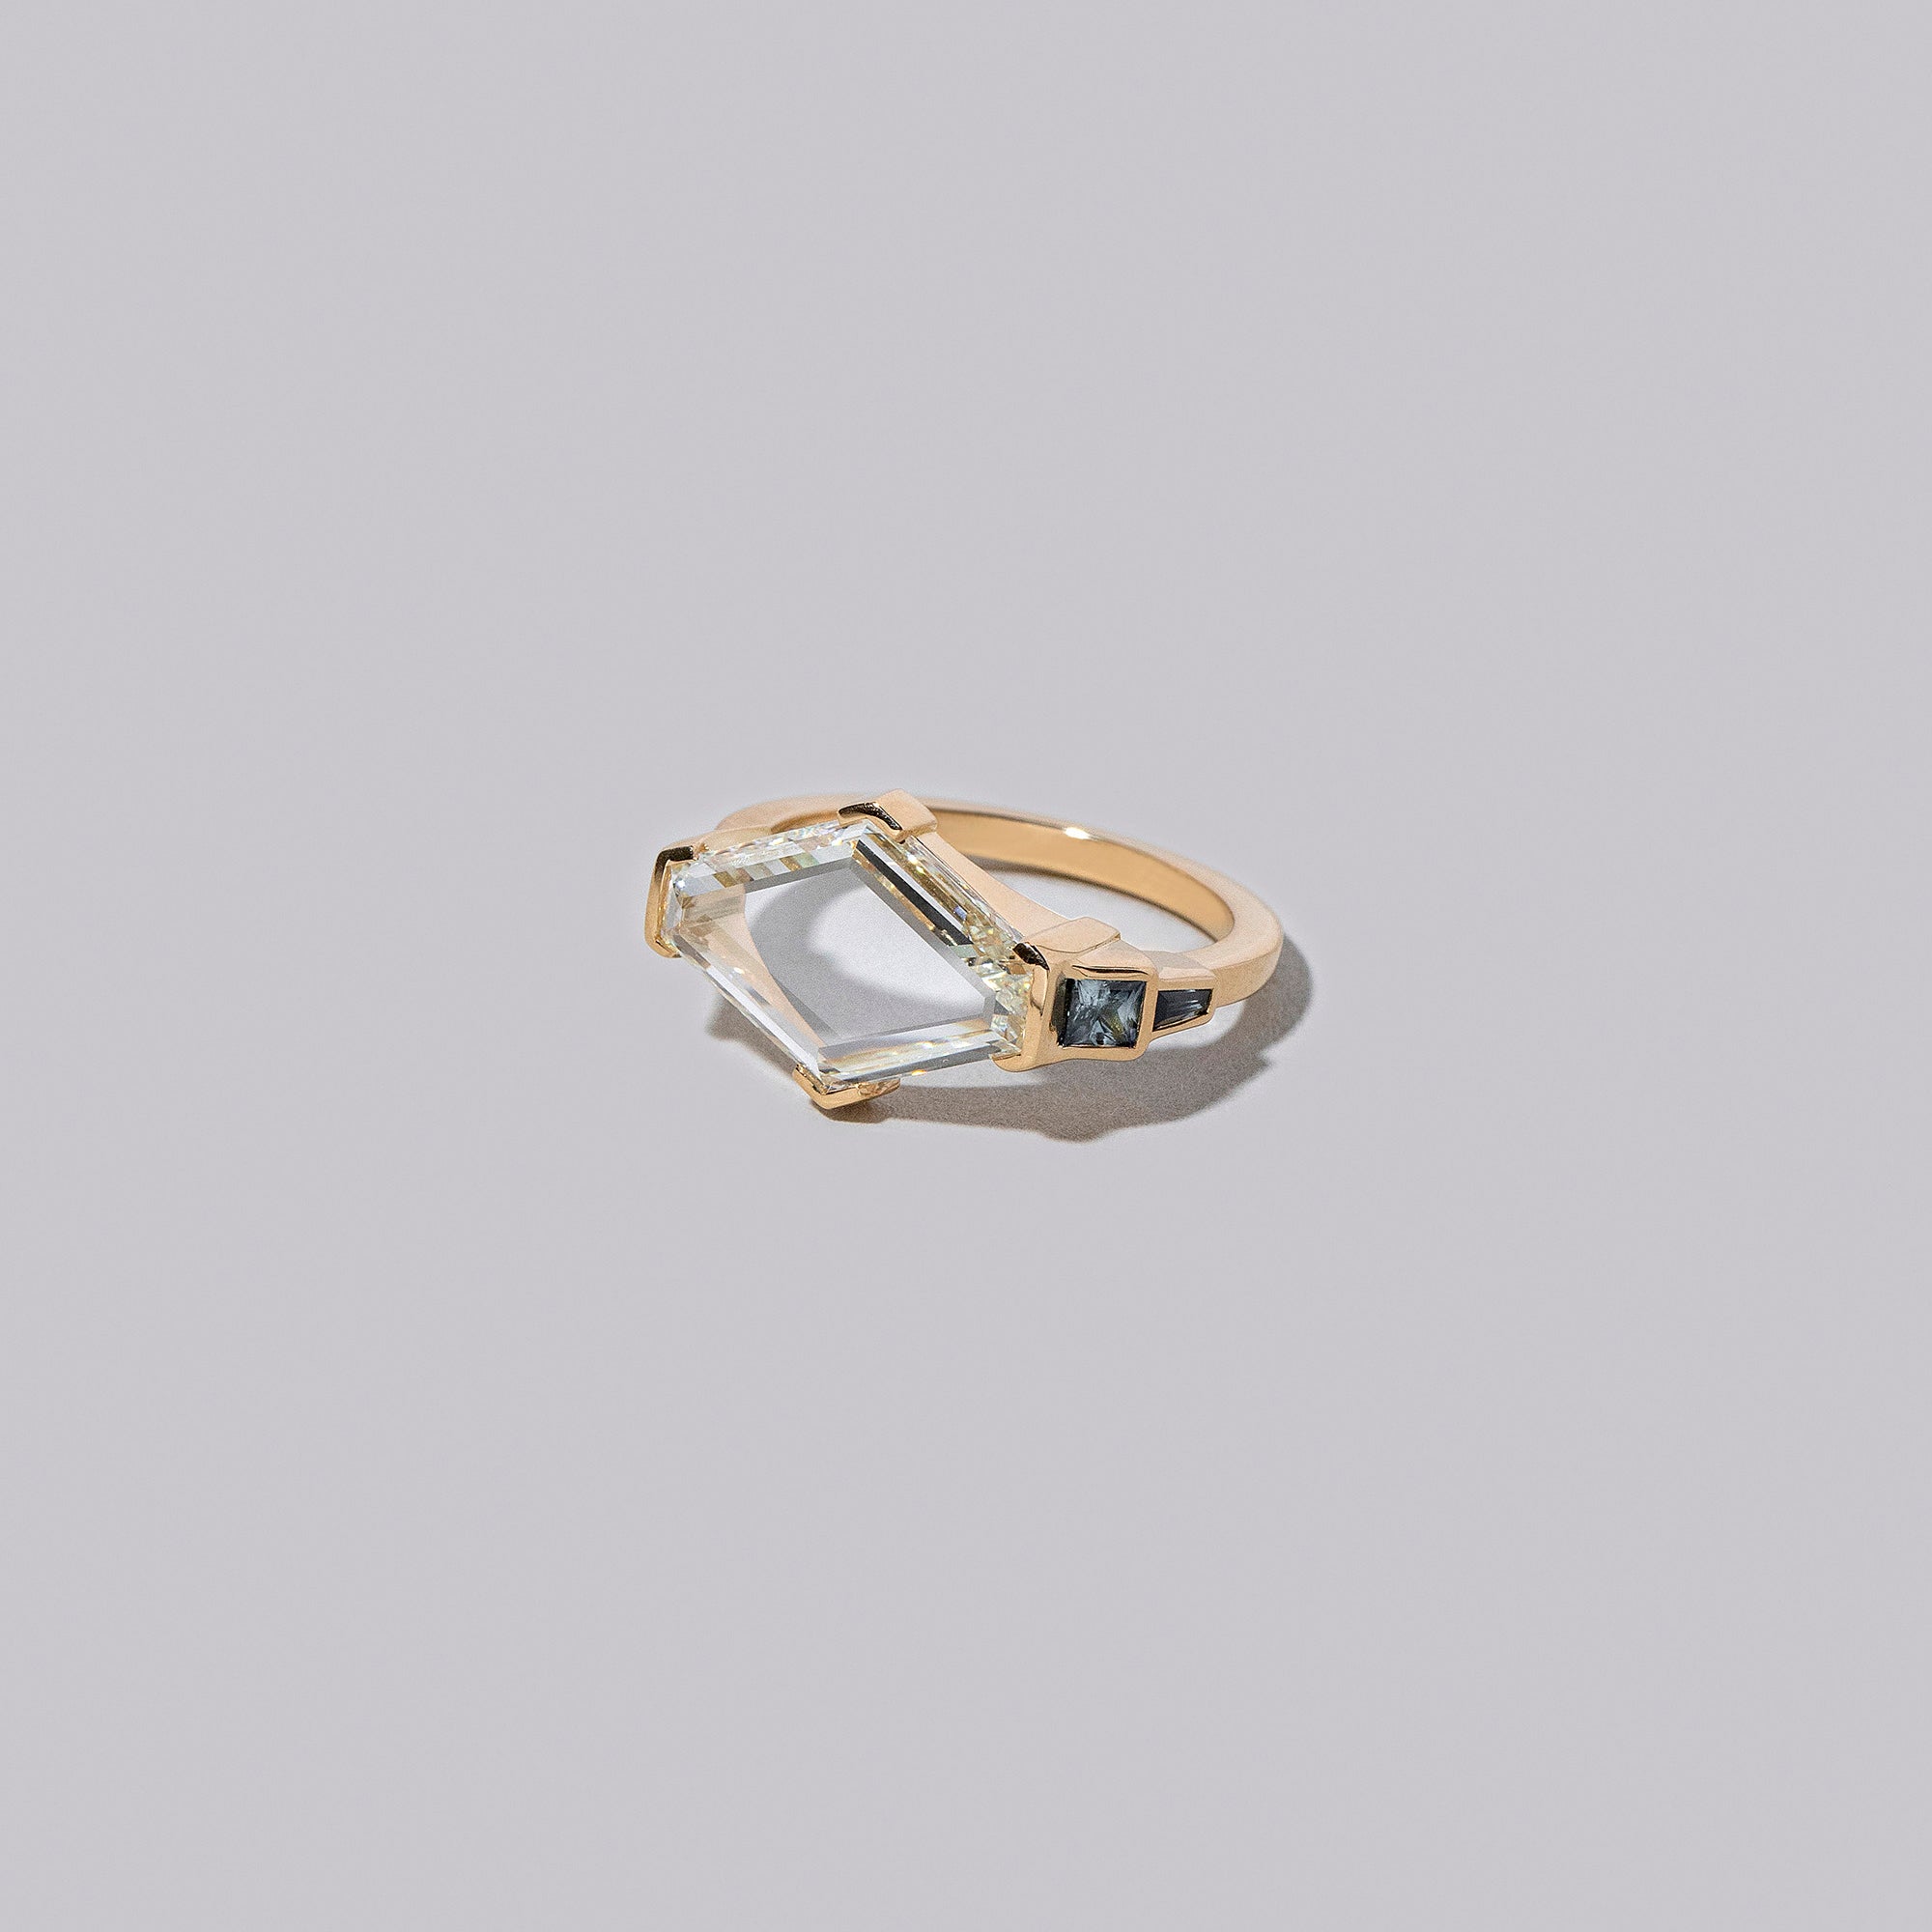 product_details::Katmai Ring on light colored background.